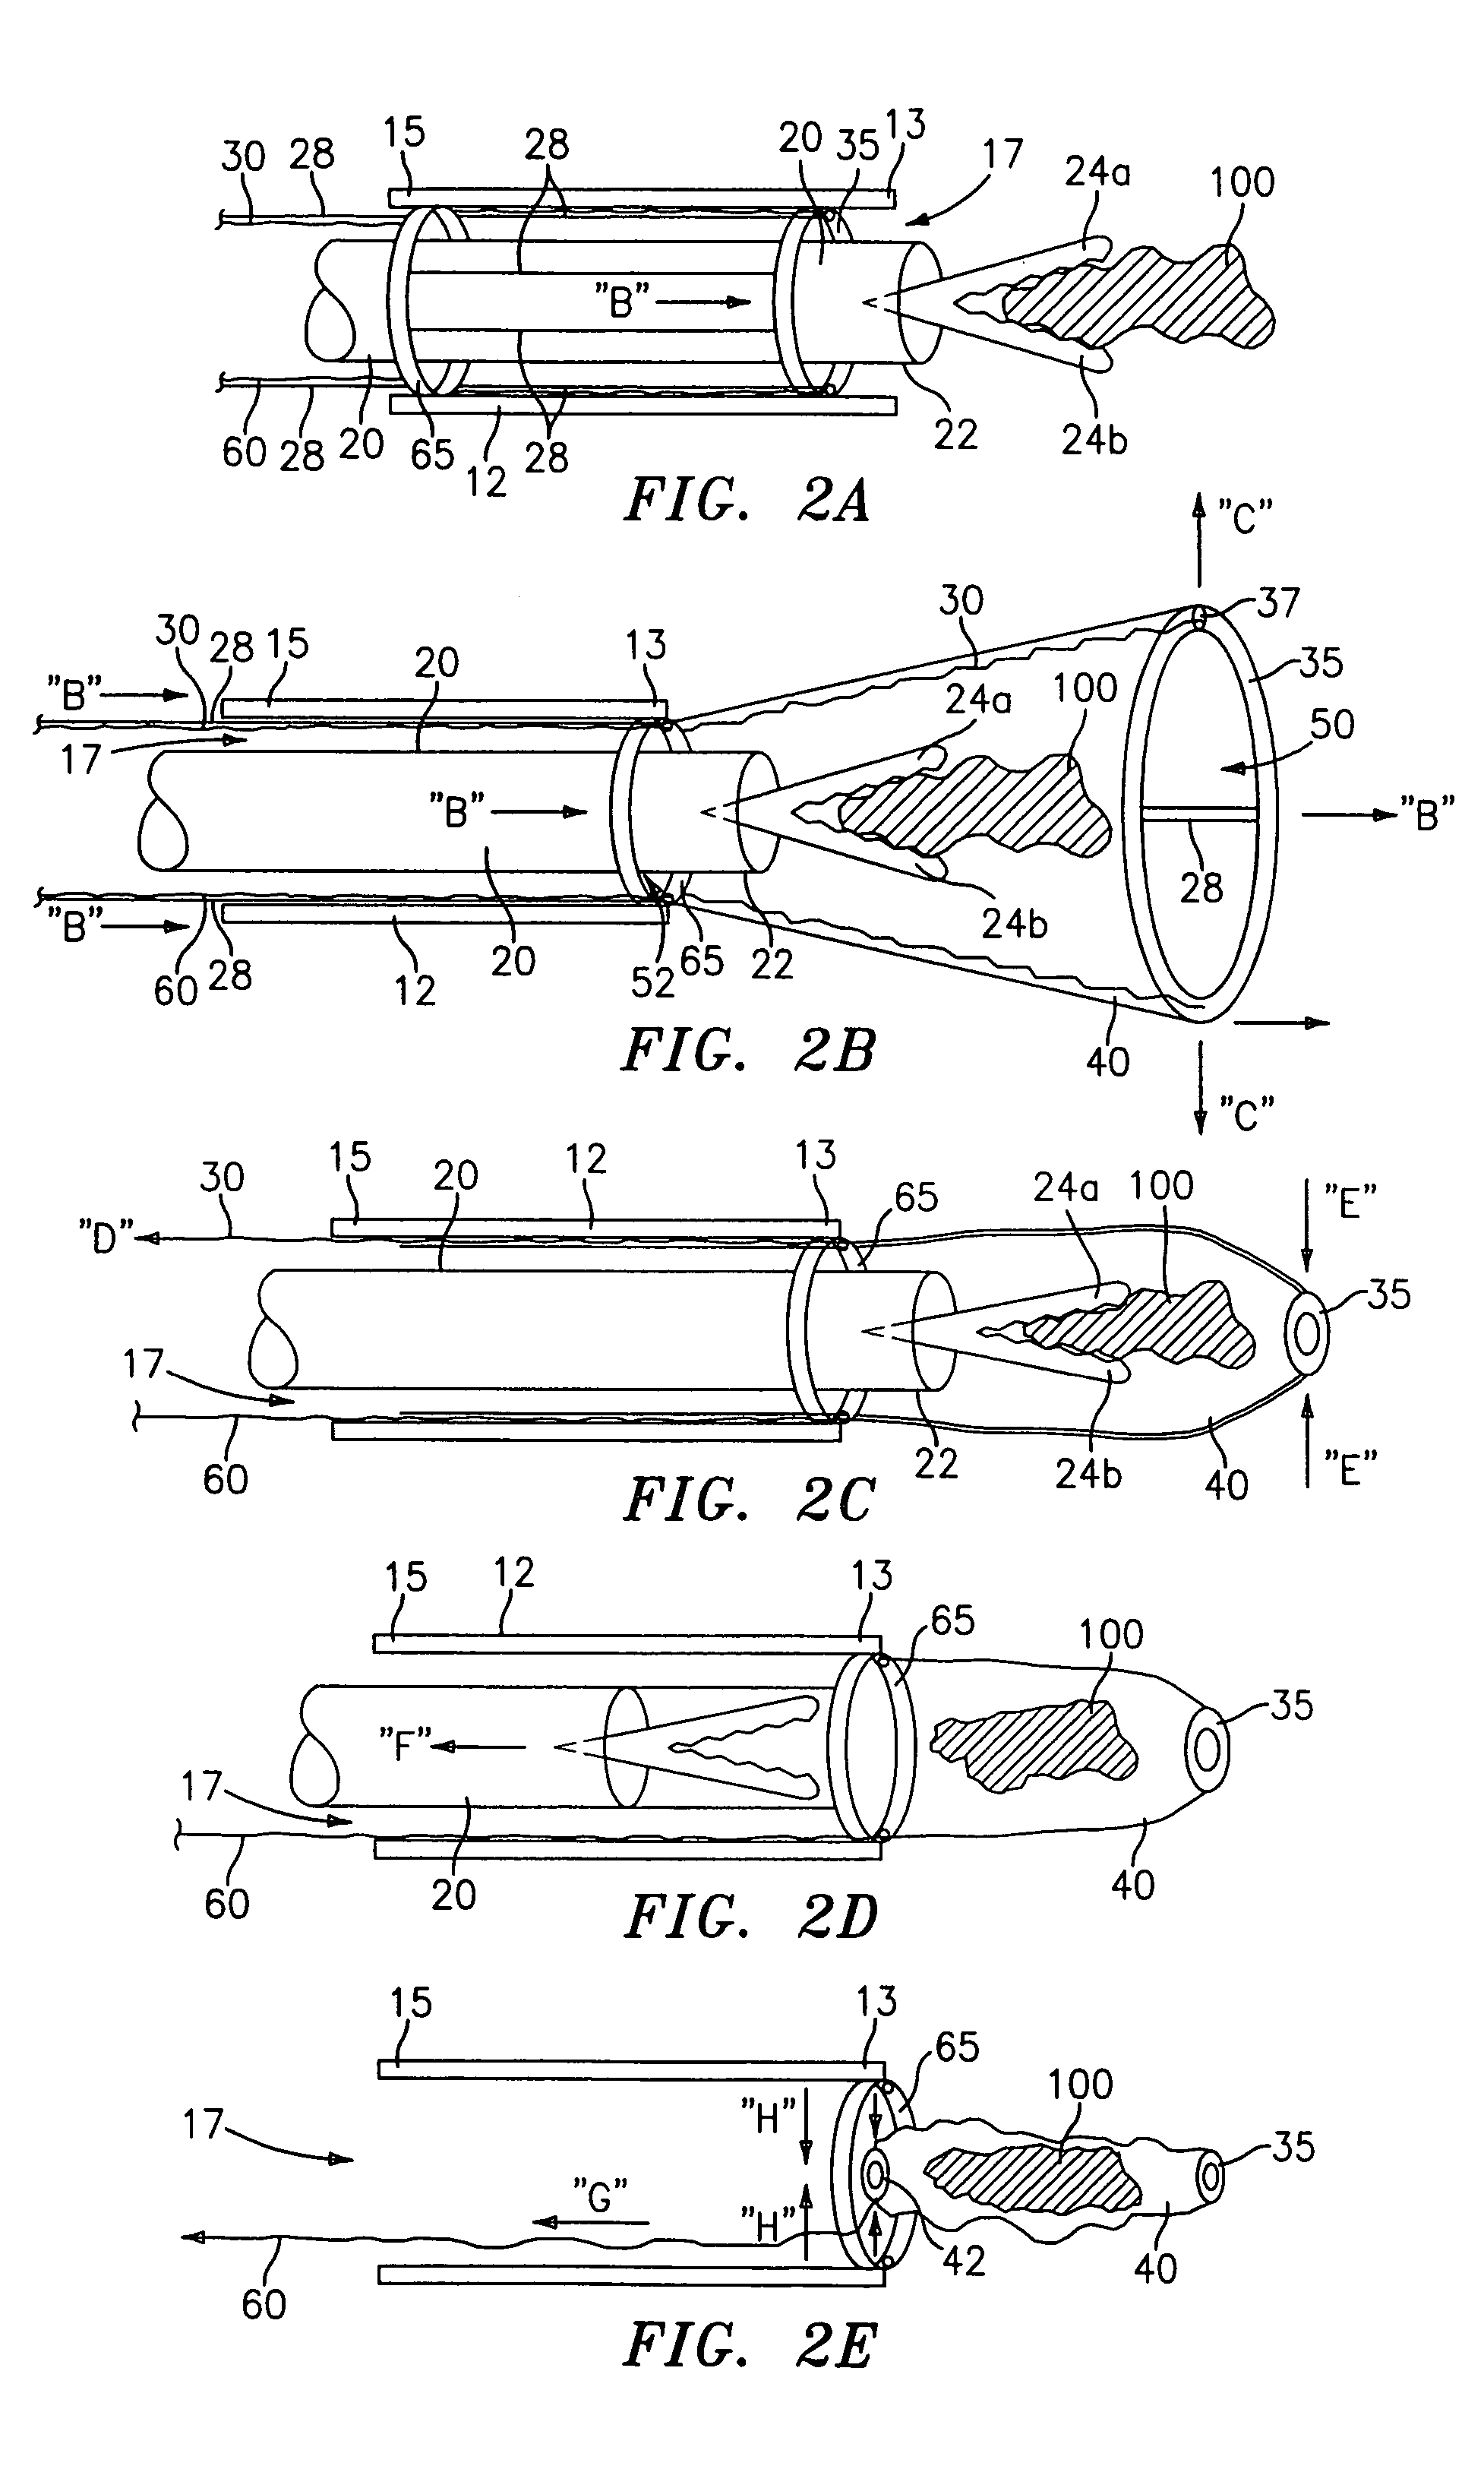 Endoscopic tissue removal apparatus and method